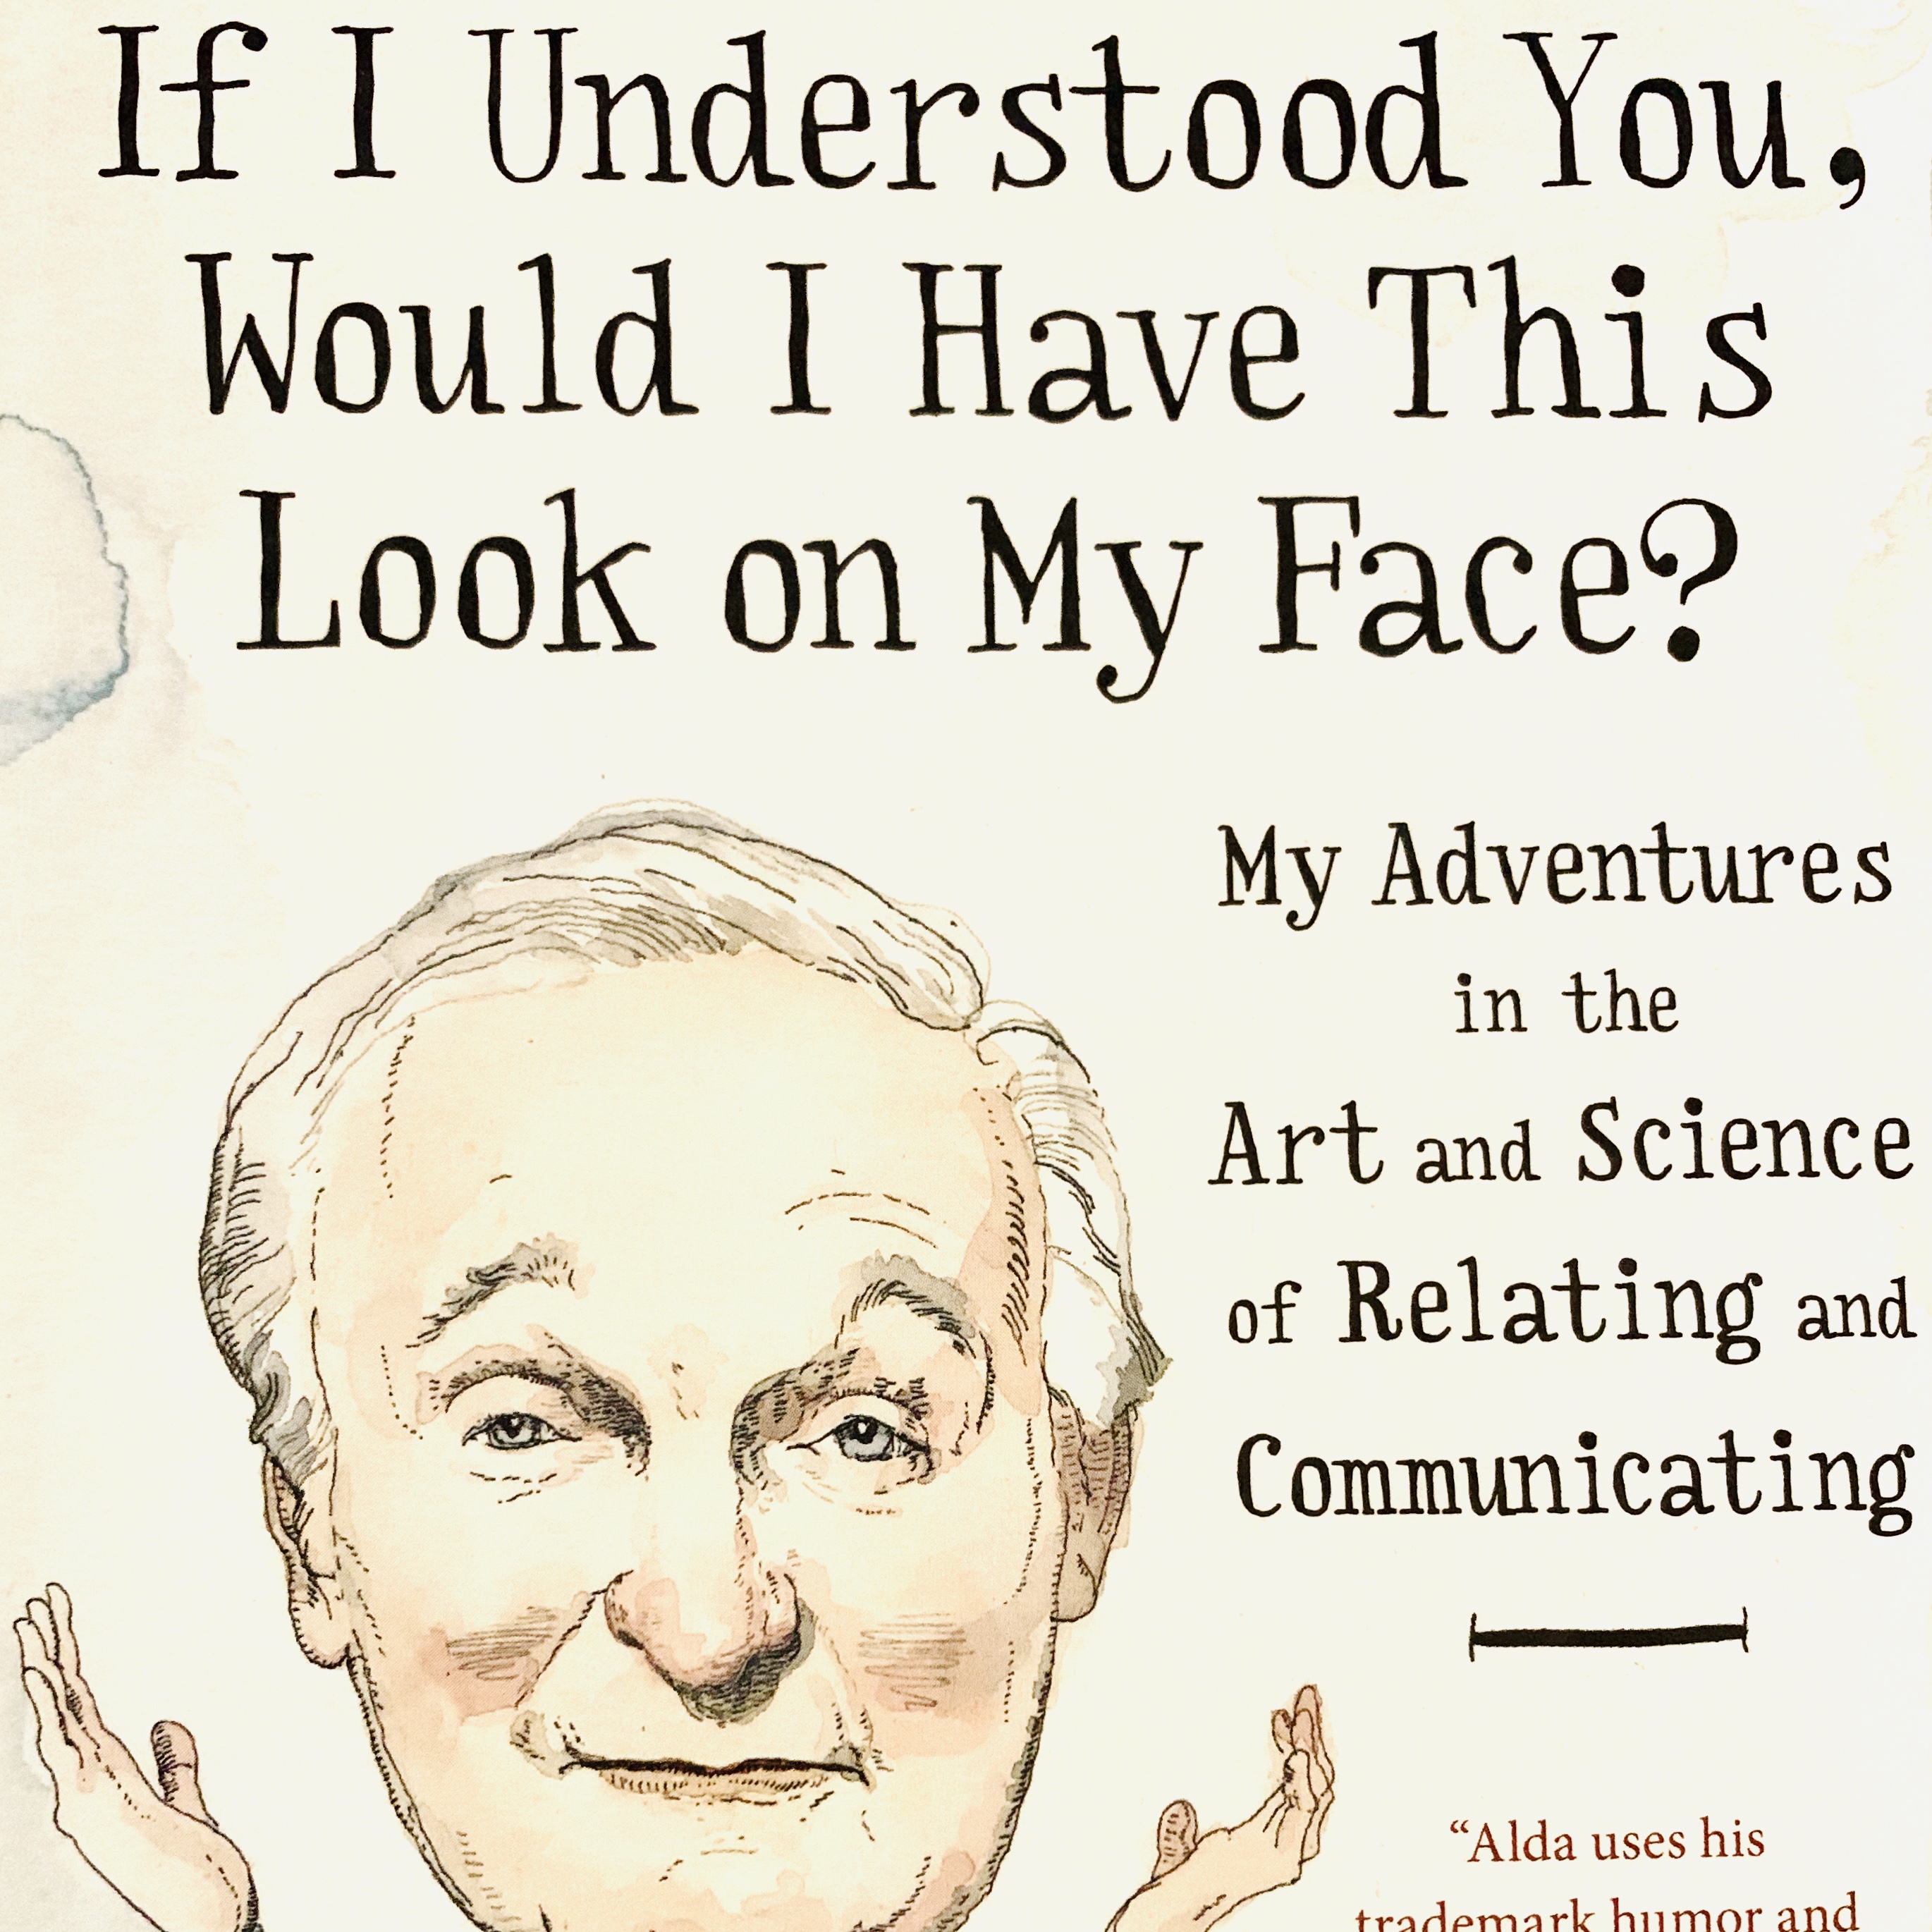 Book Review: If I Understood You, Would I Have This Look on My Face?